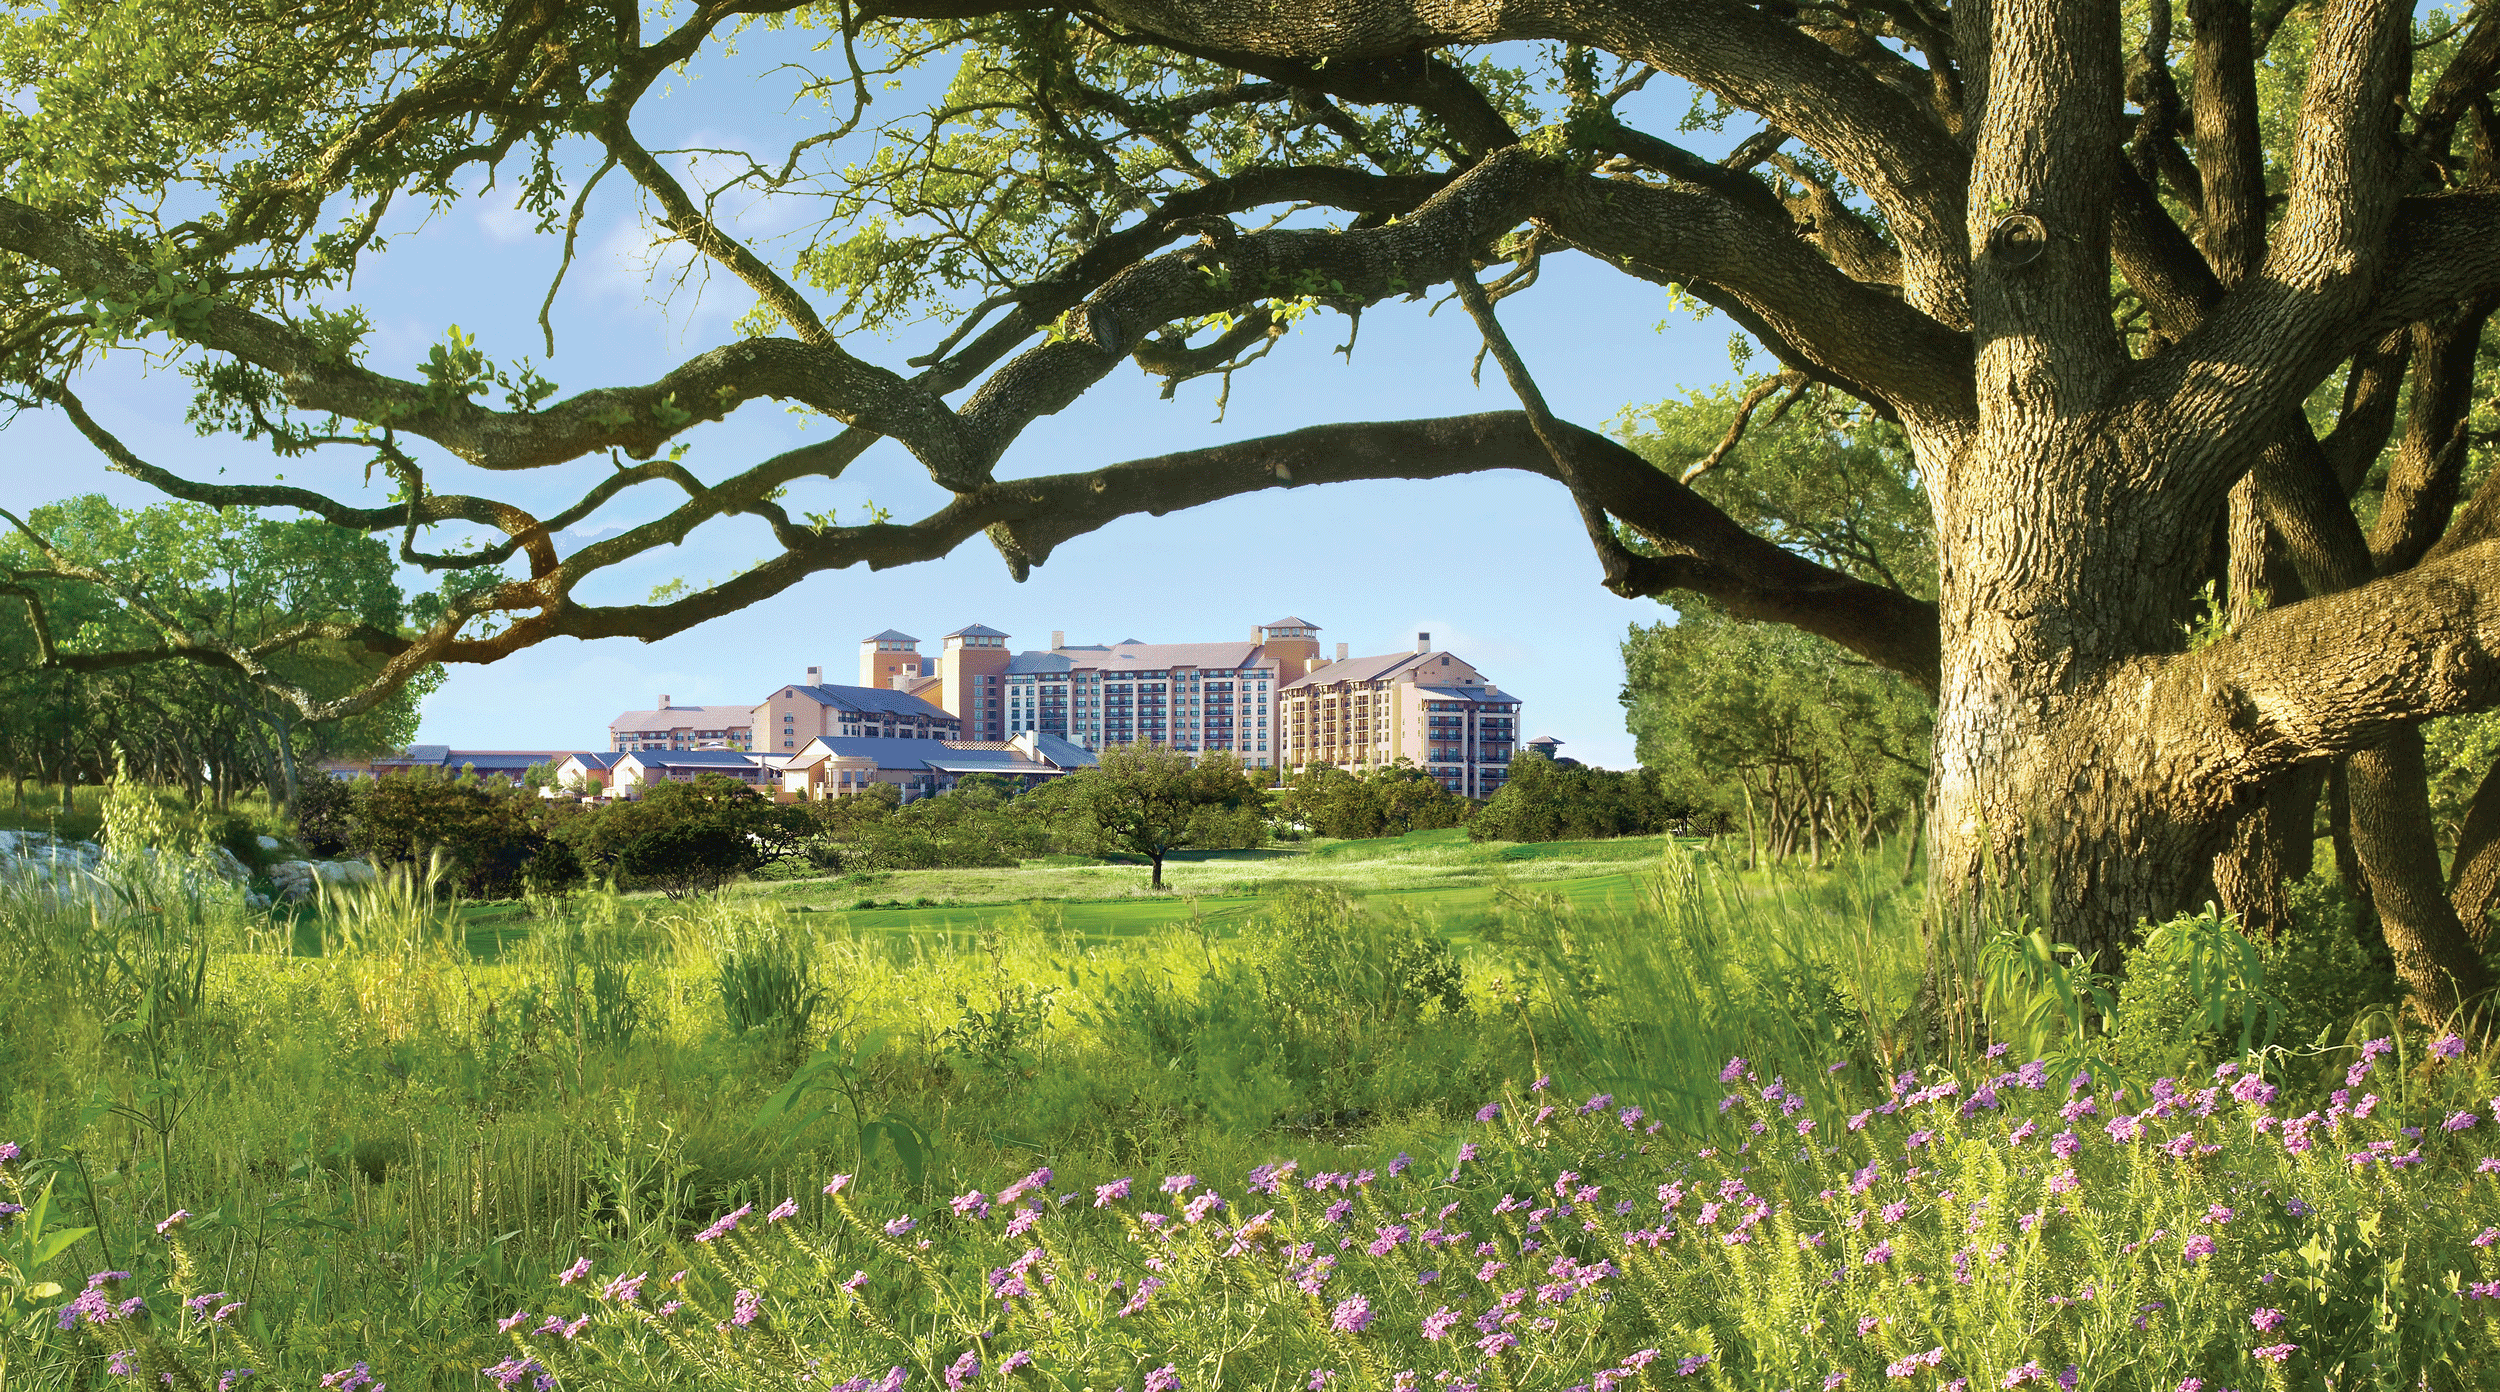 The JW Marriott San Antonio is set in the rolling landscape of the Texas Hill Country.